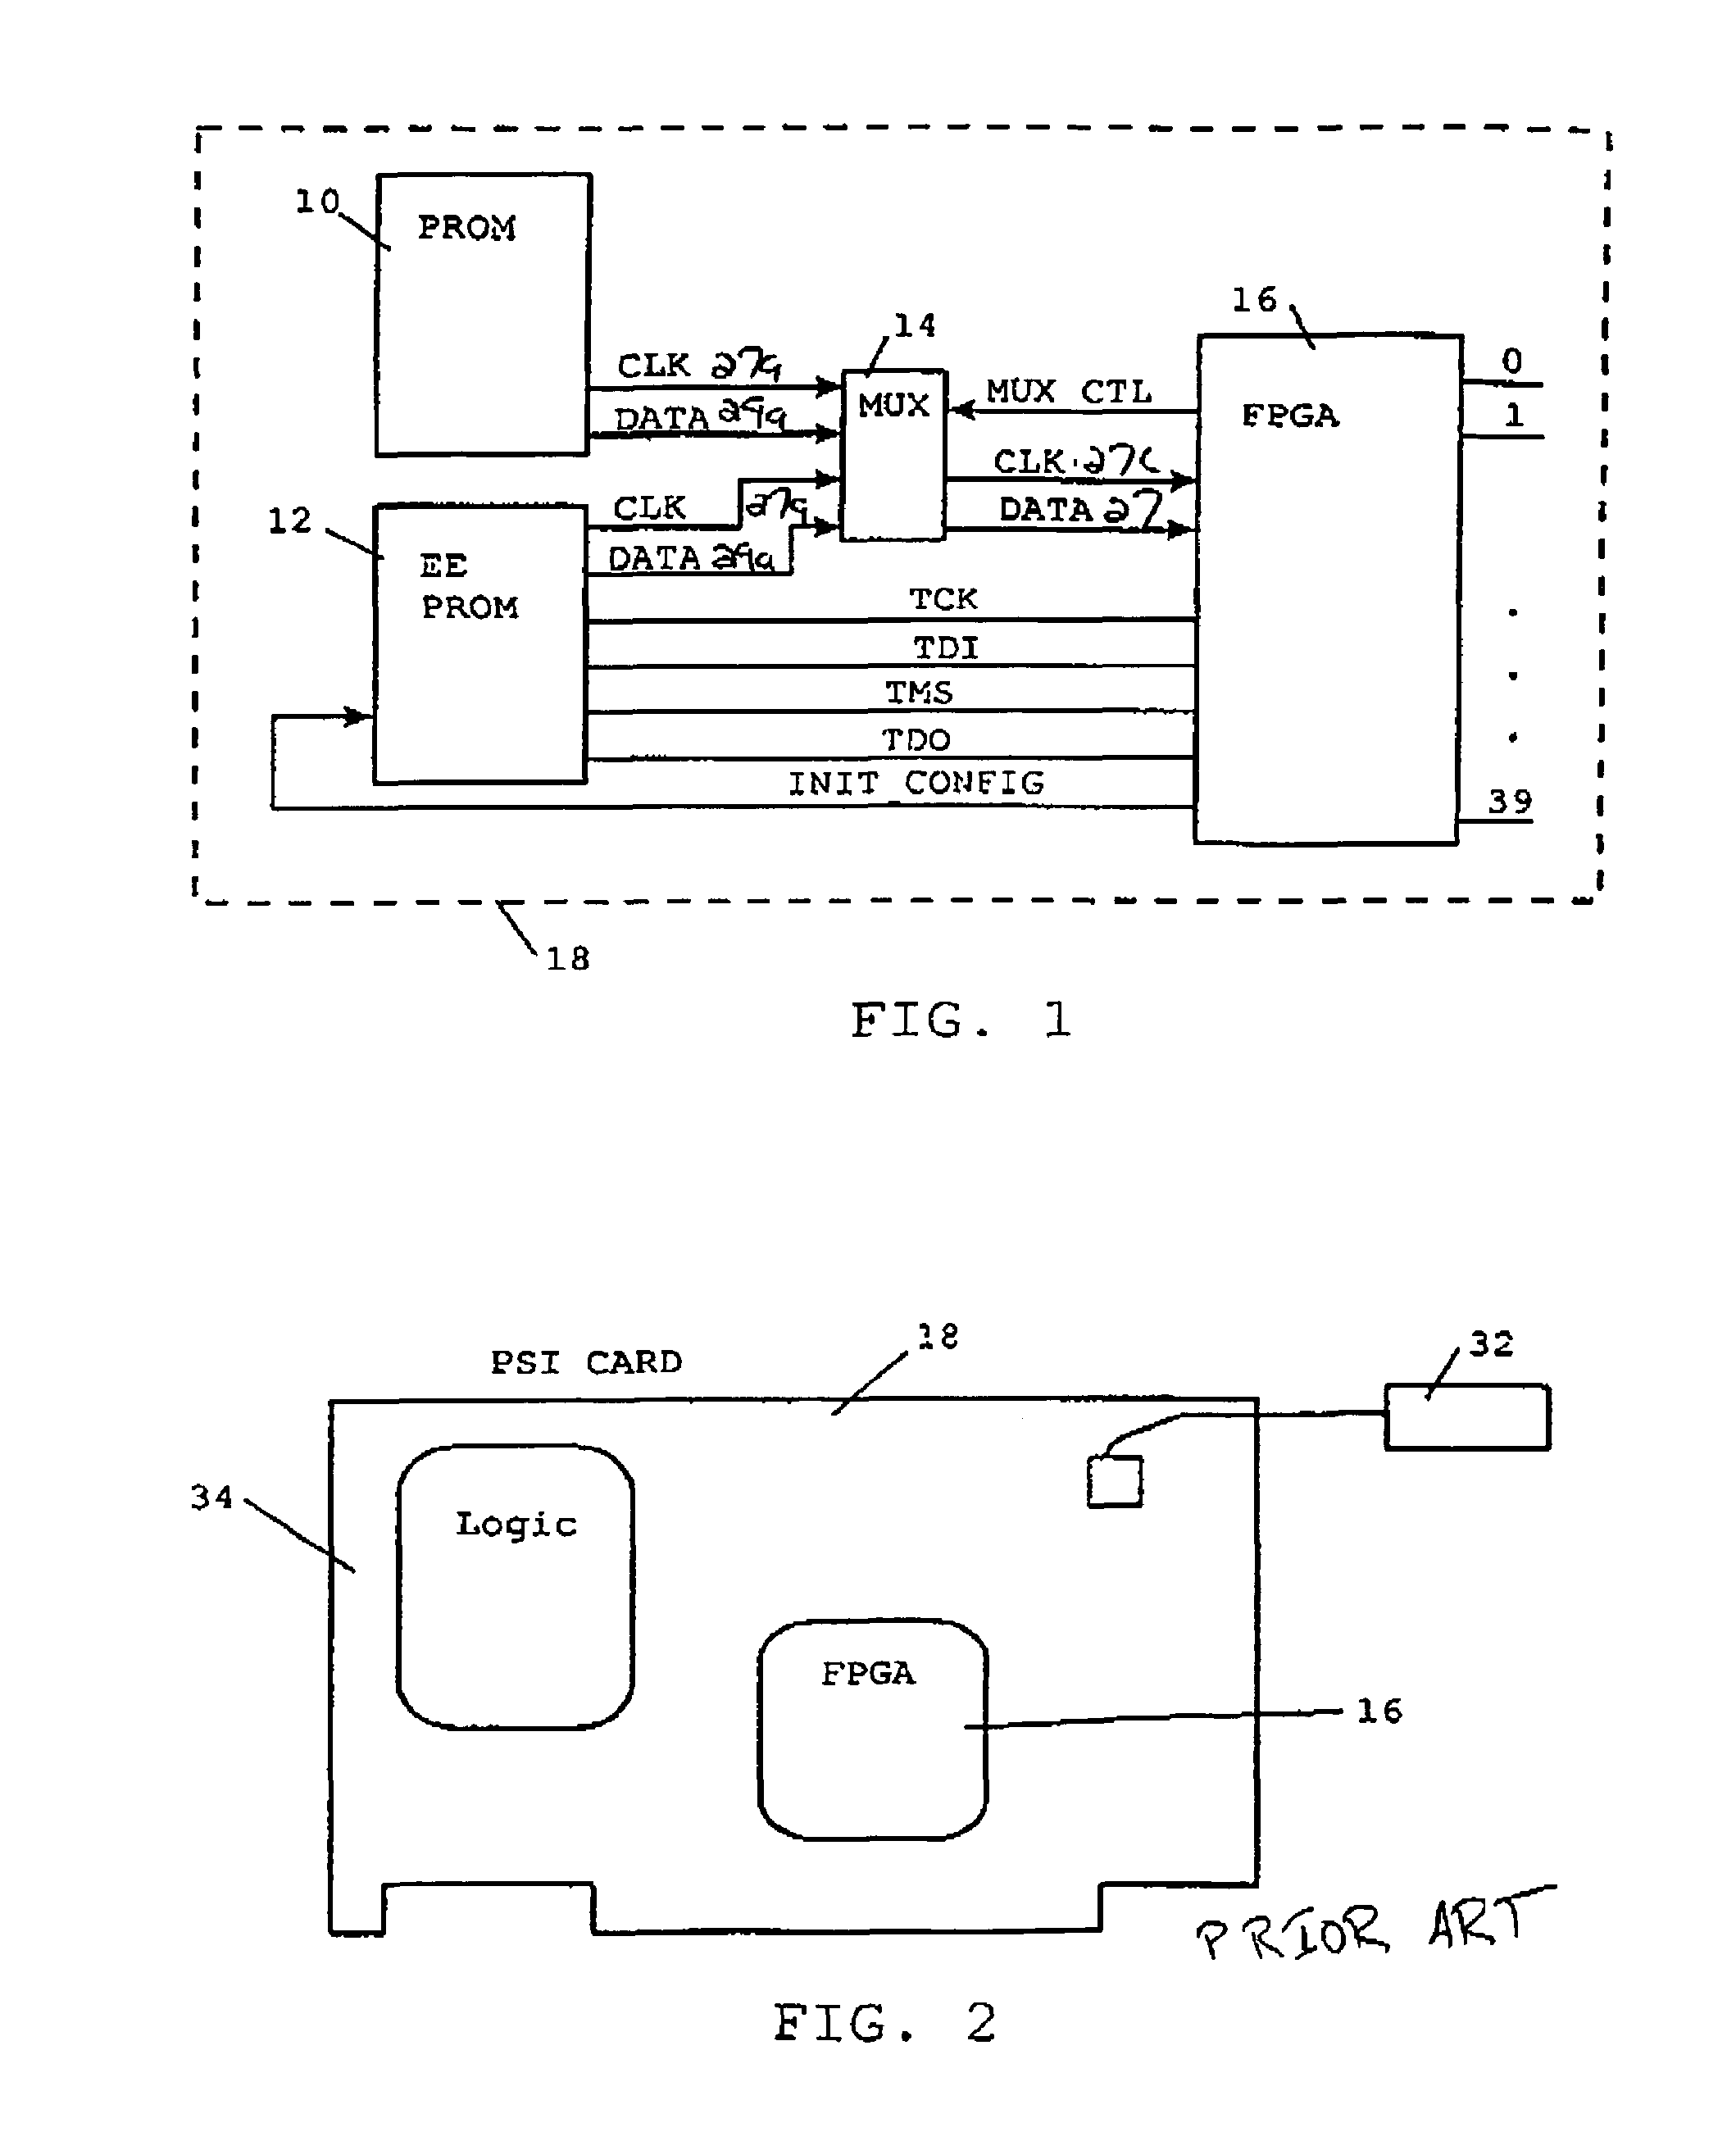 Method and system for programming FPGAs on PC-cards without additional hardware